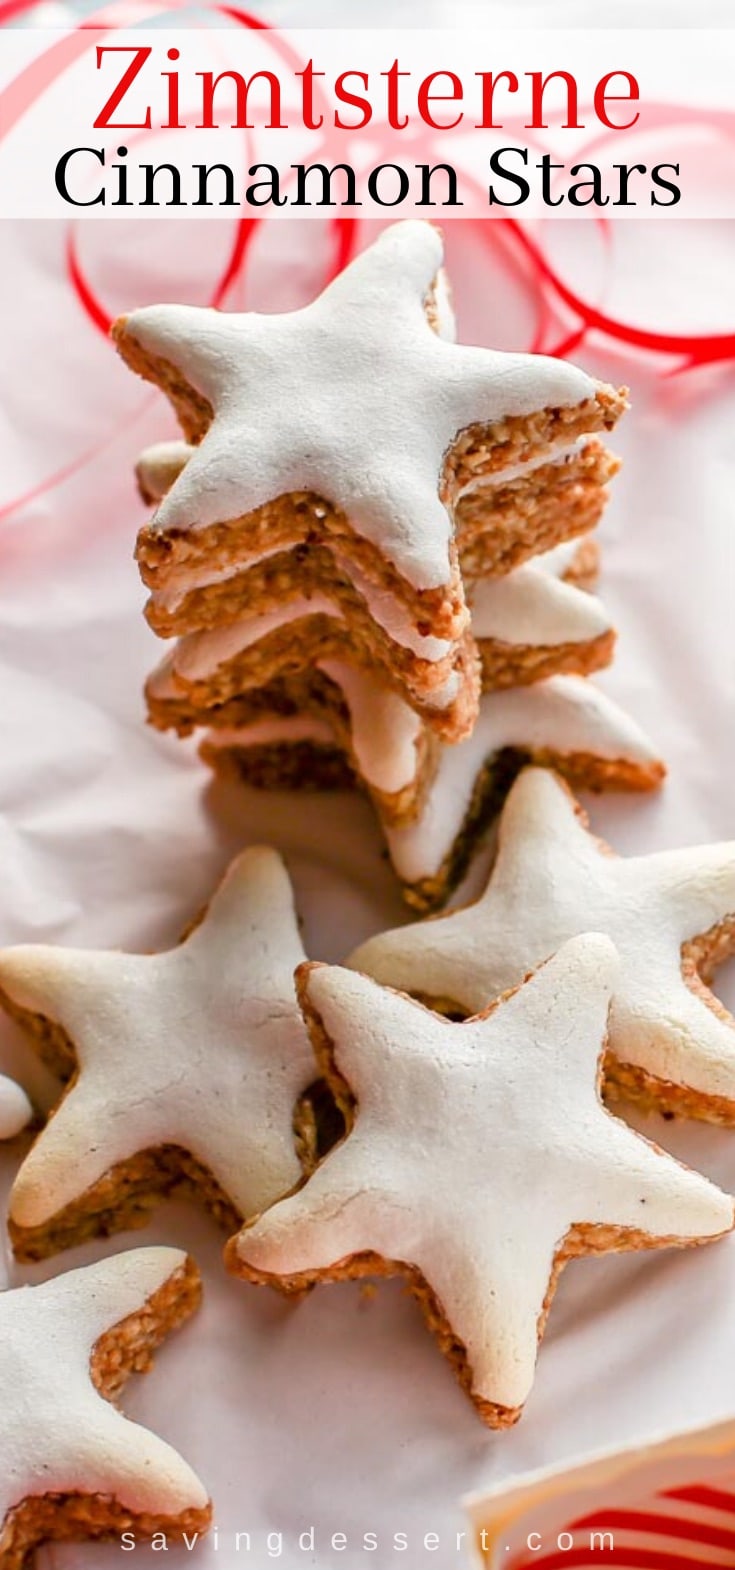 A stack of cinnamon star cookies also known as Zimtsterne